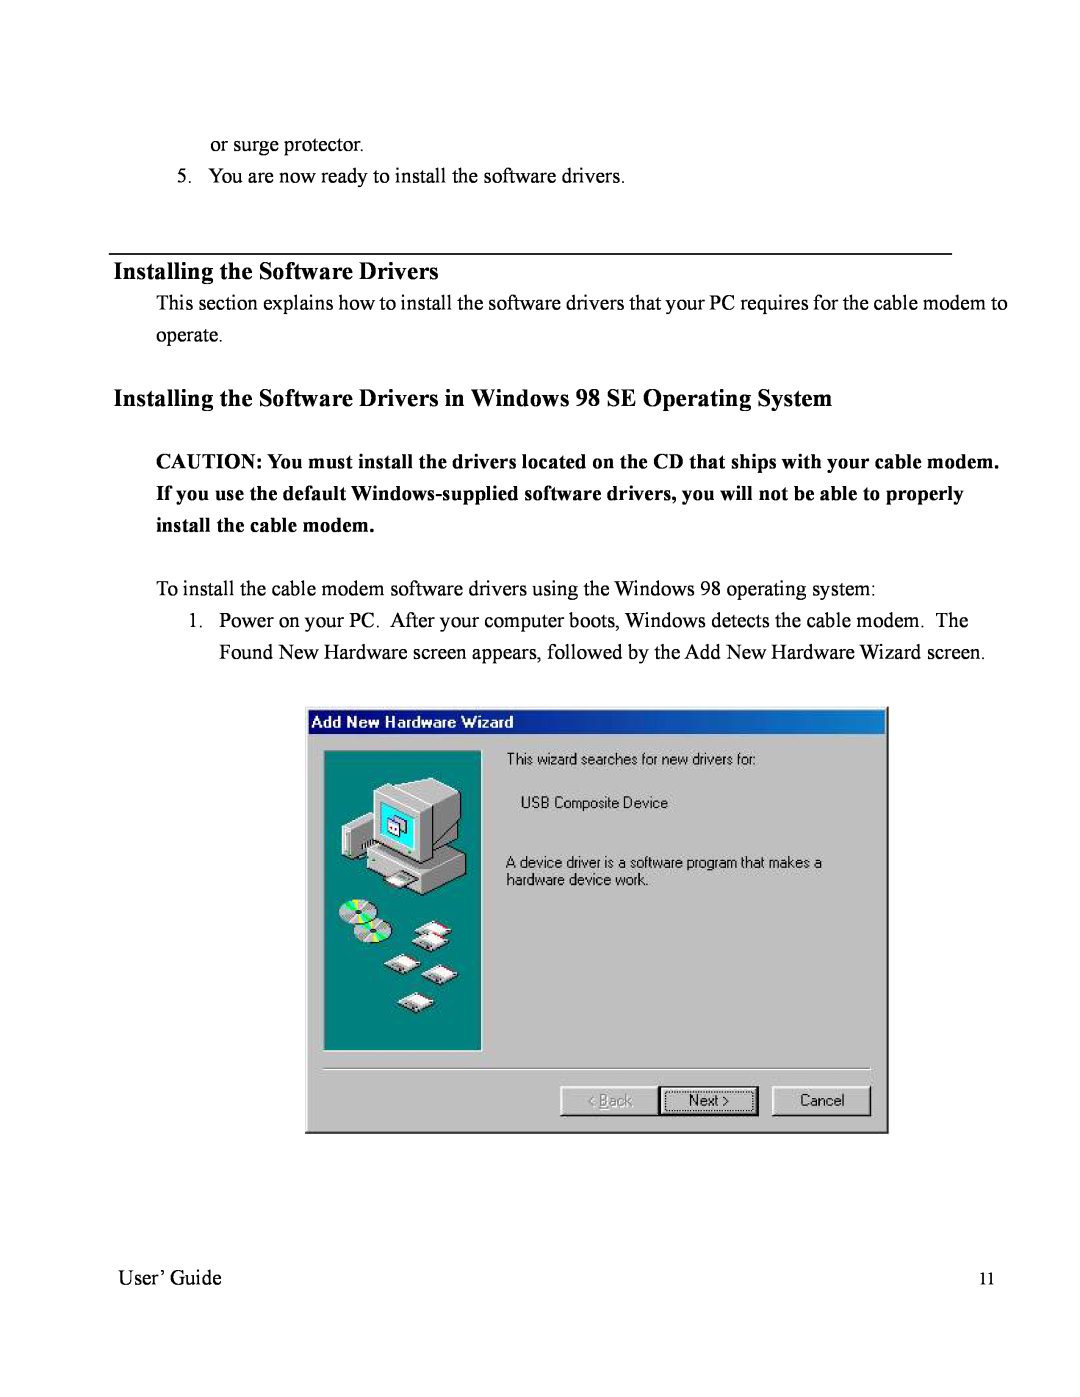 Orion 2000 manual Installing the Software Drivers in Windows 98 SE Operating System 